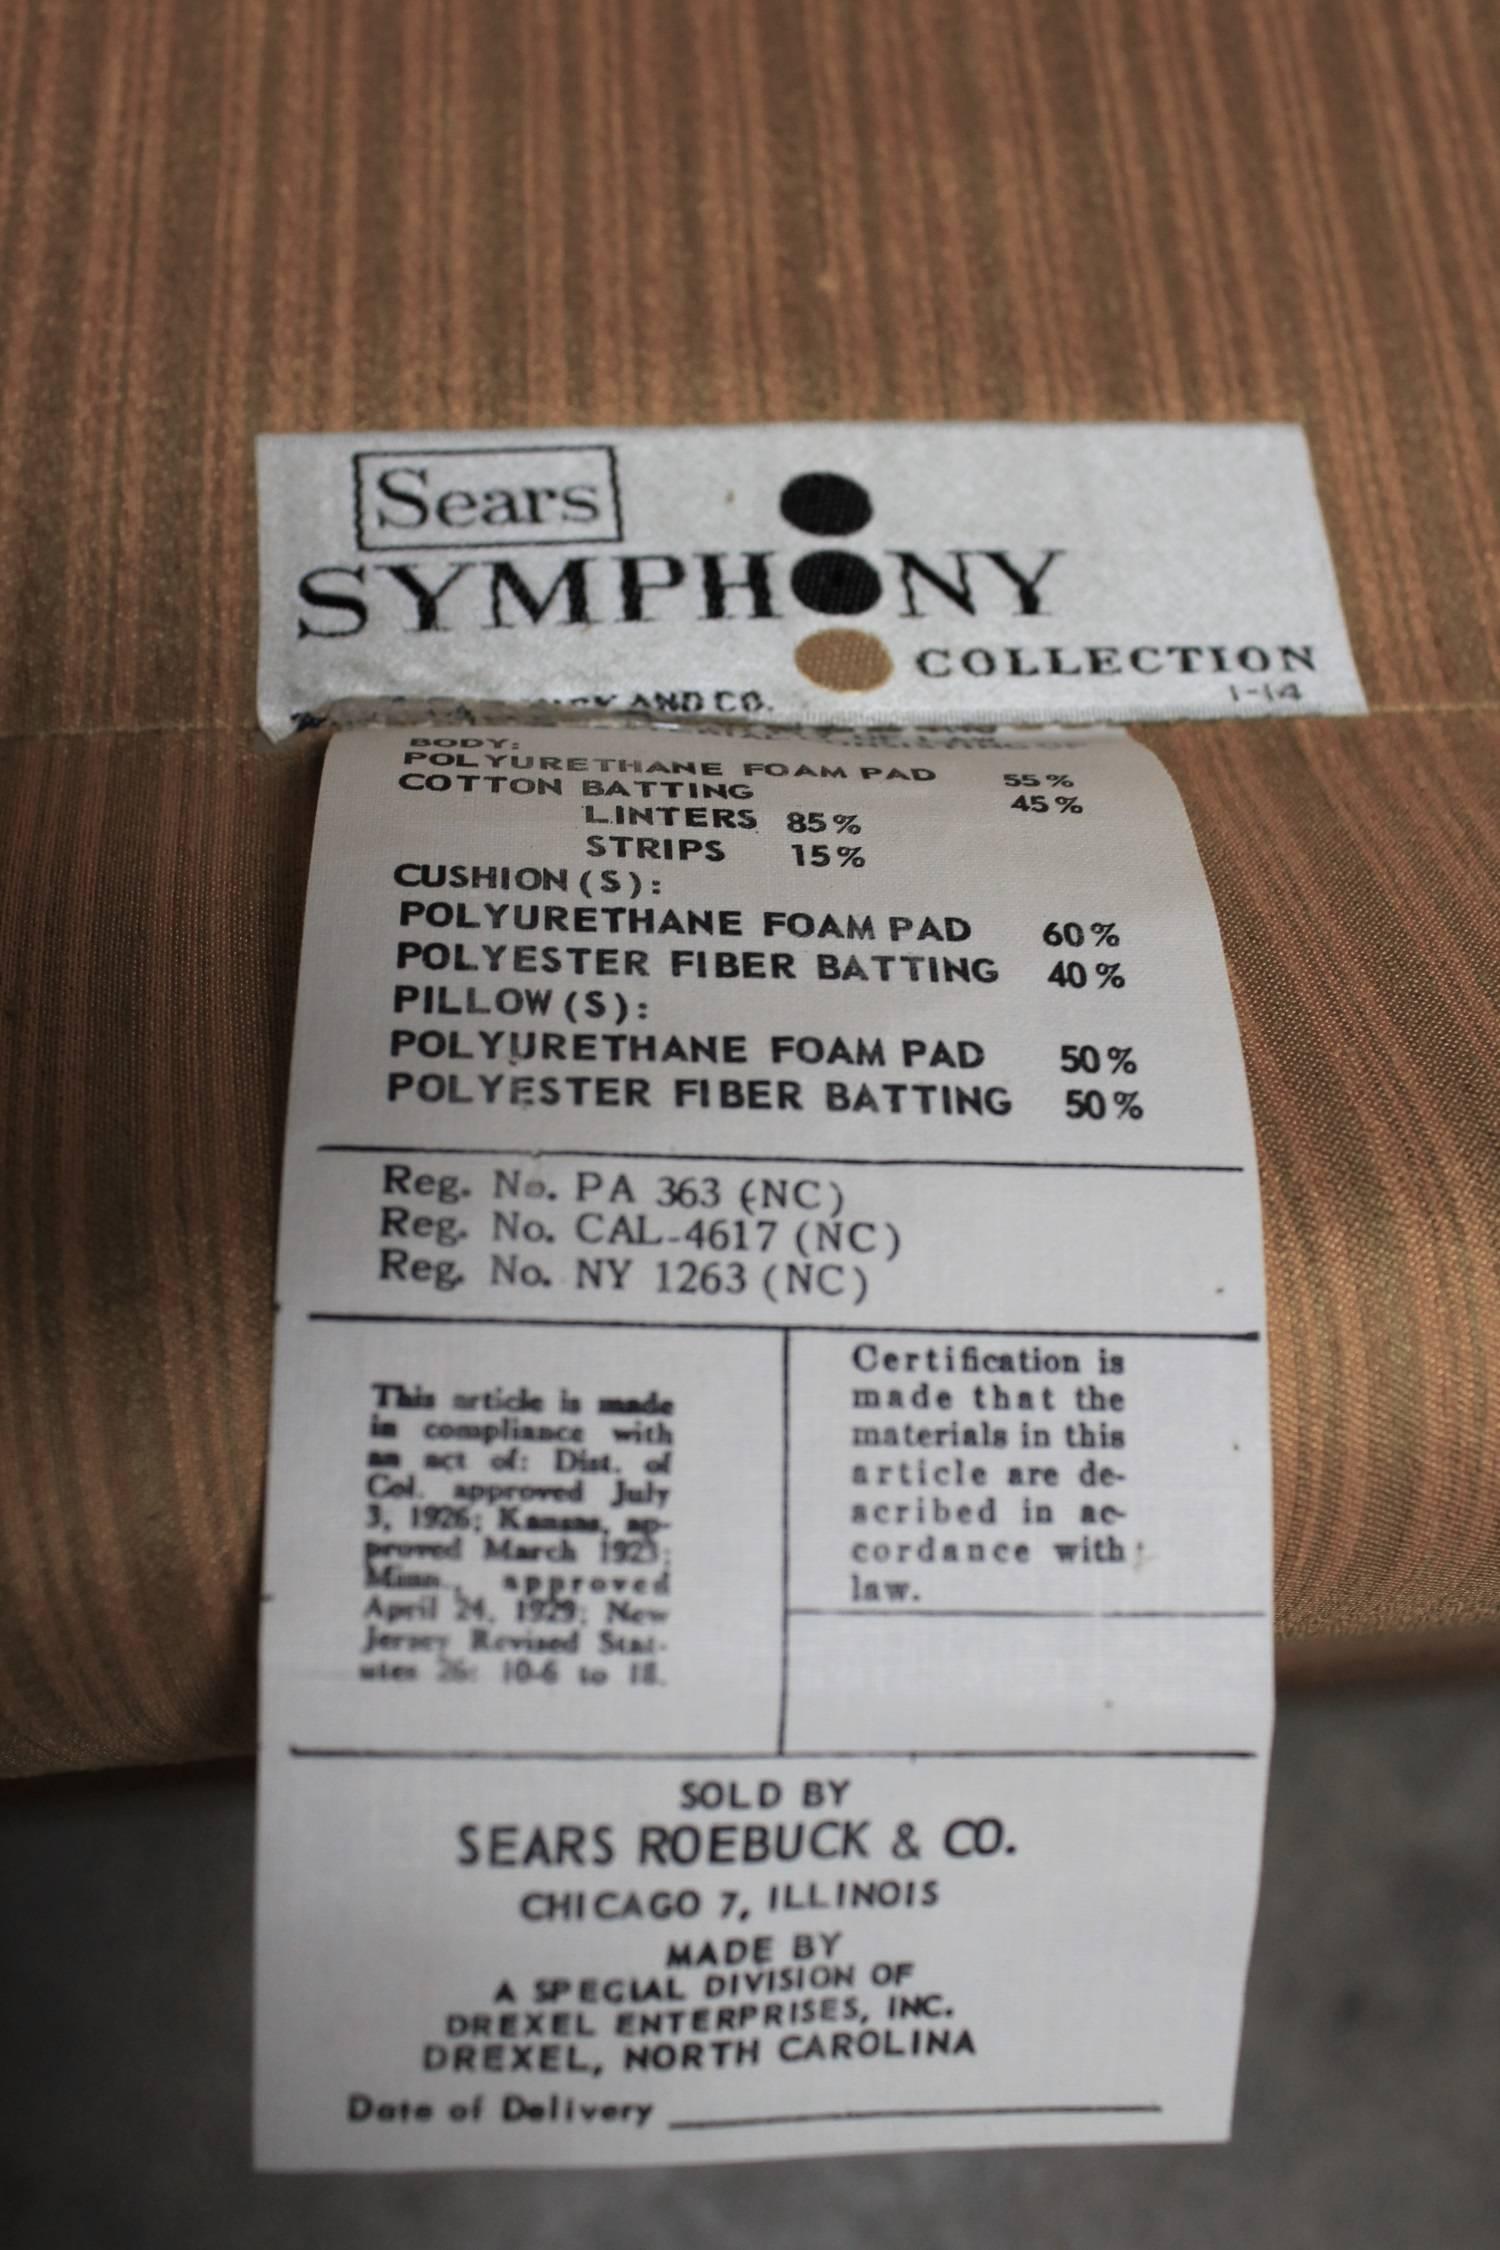 Gold Slipper Chairs, Drexel for Sears Symphony Vintage, Mid-Century Modern, Pair 1